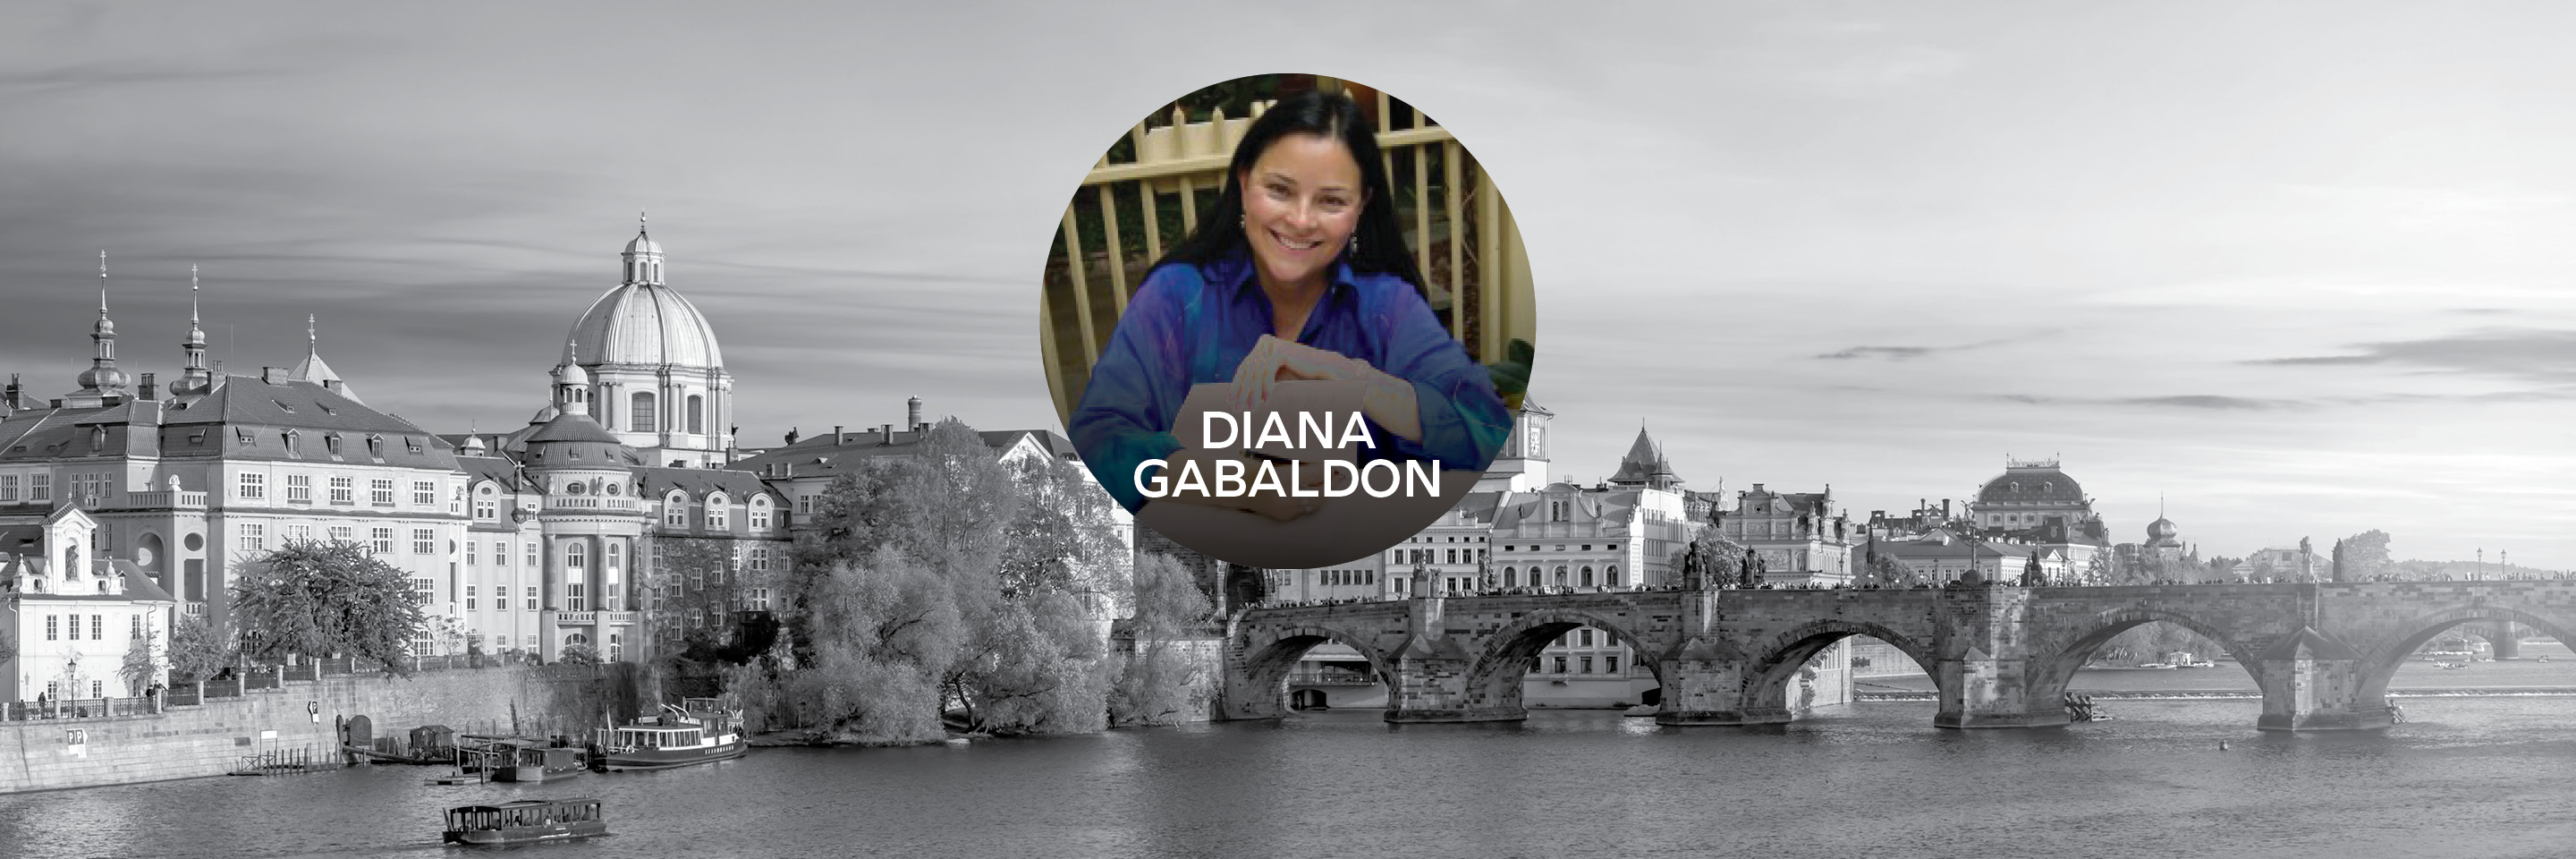 Go Tell the Bees… Danube Dreams Come True with Diana Gabaldon (plus 2 nights in Prague)